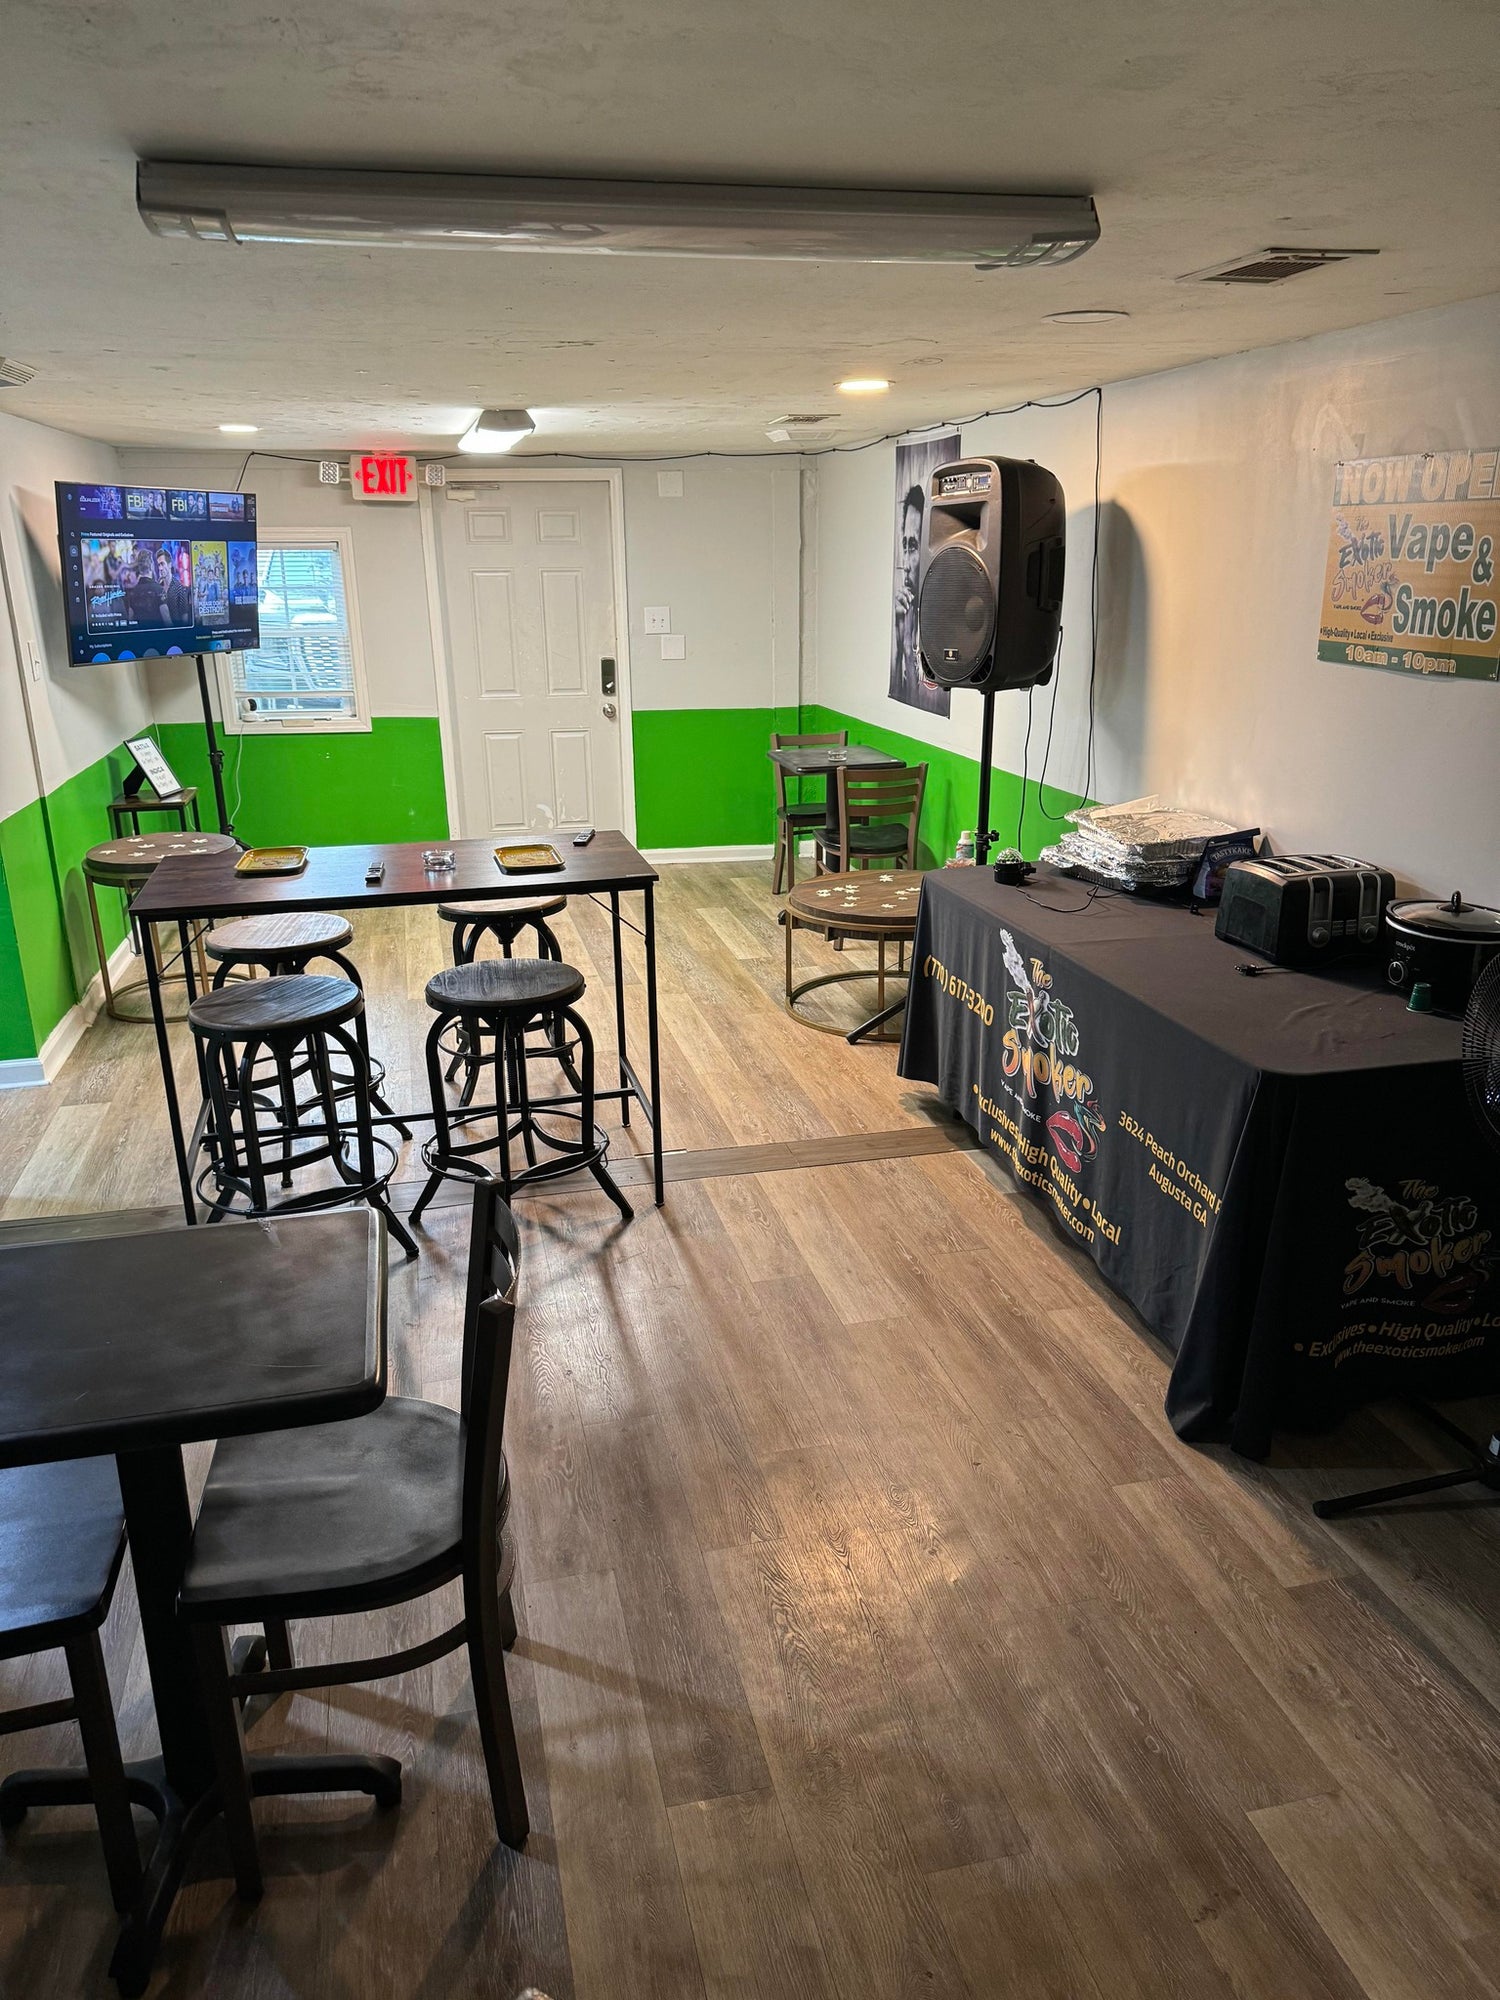 The Exotic Smoker Vape and Smoke Shop - Rental Venue 3 - tables and chairs in a white and green building with a big tv and a table with sound system